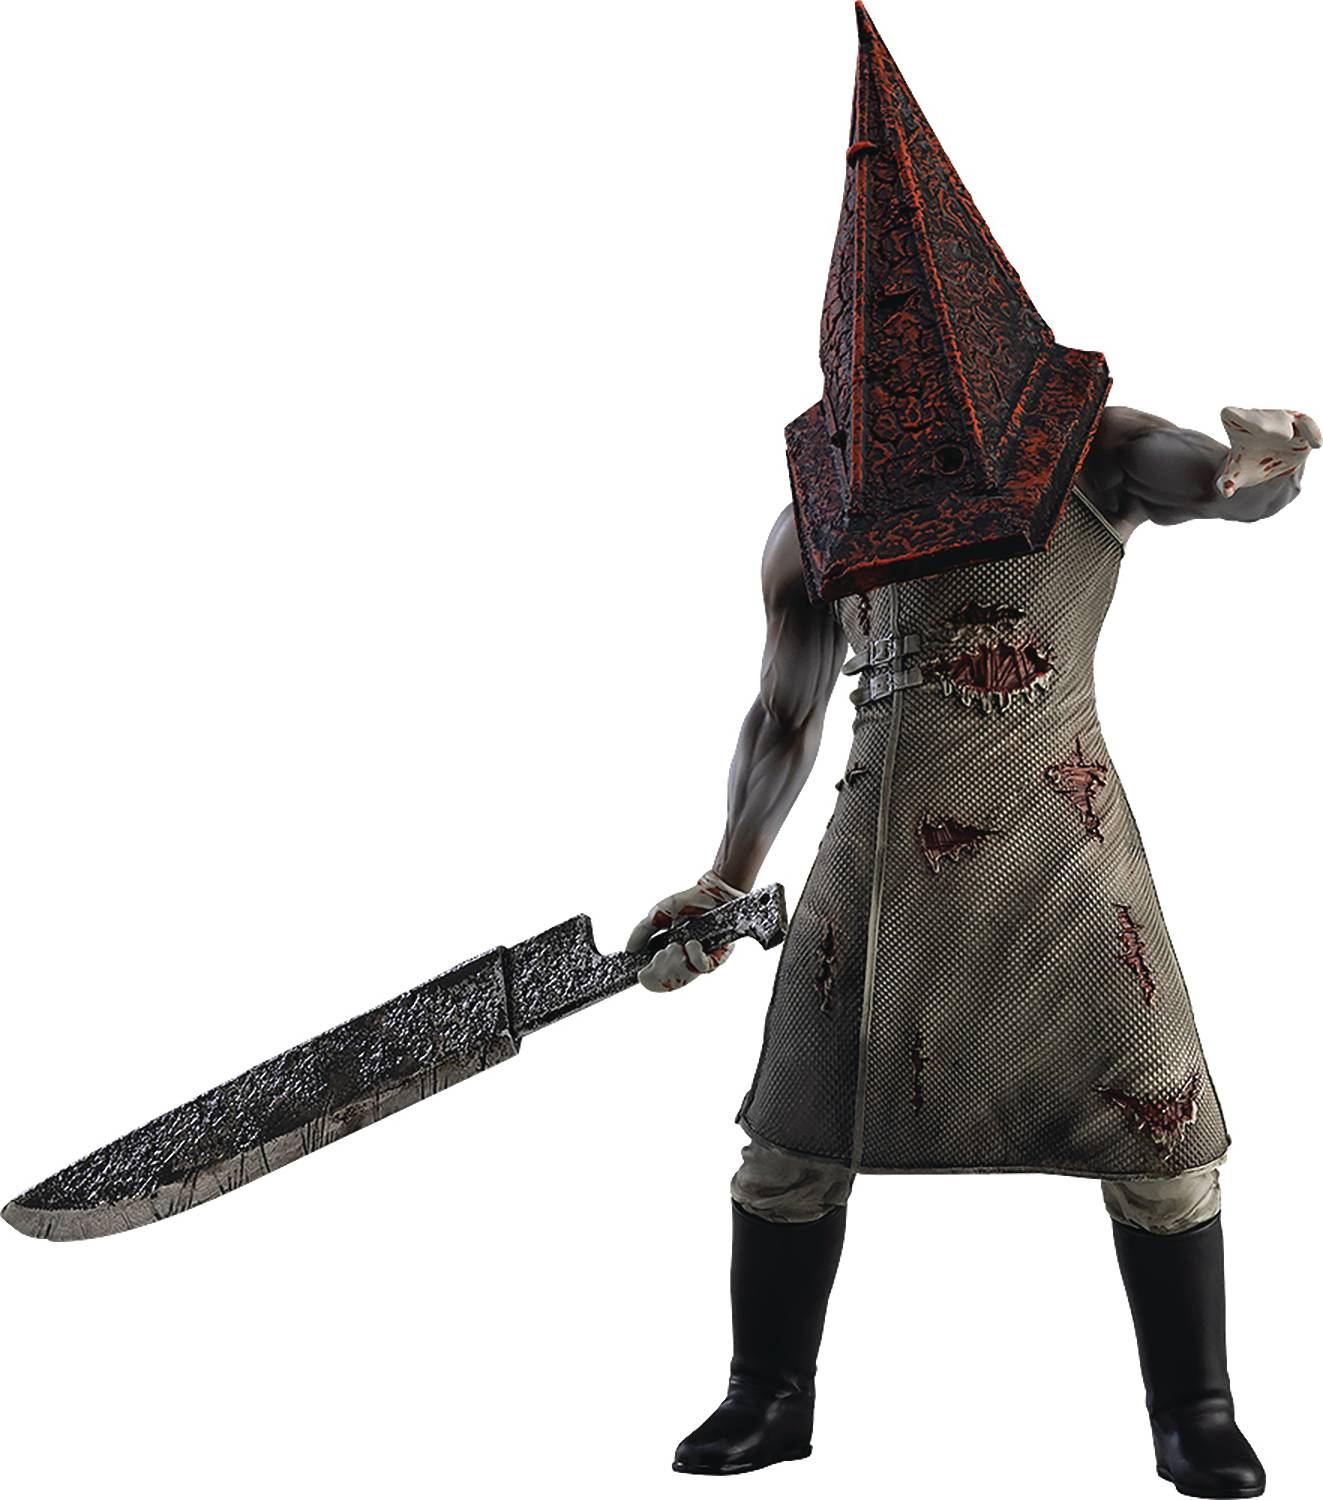 Silent Hill 2 Pop Up Parade Red Pyramid Thing Figure 